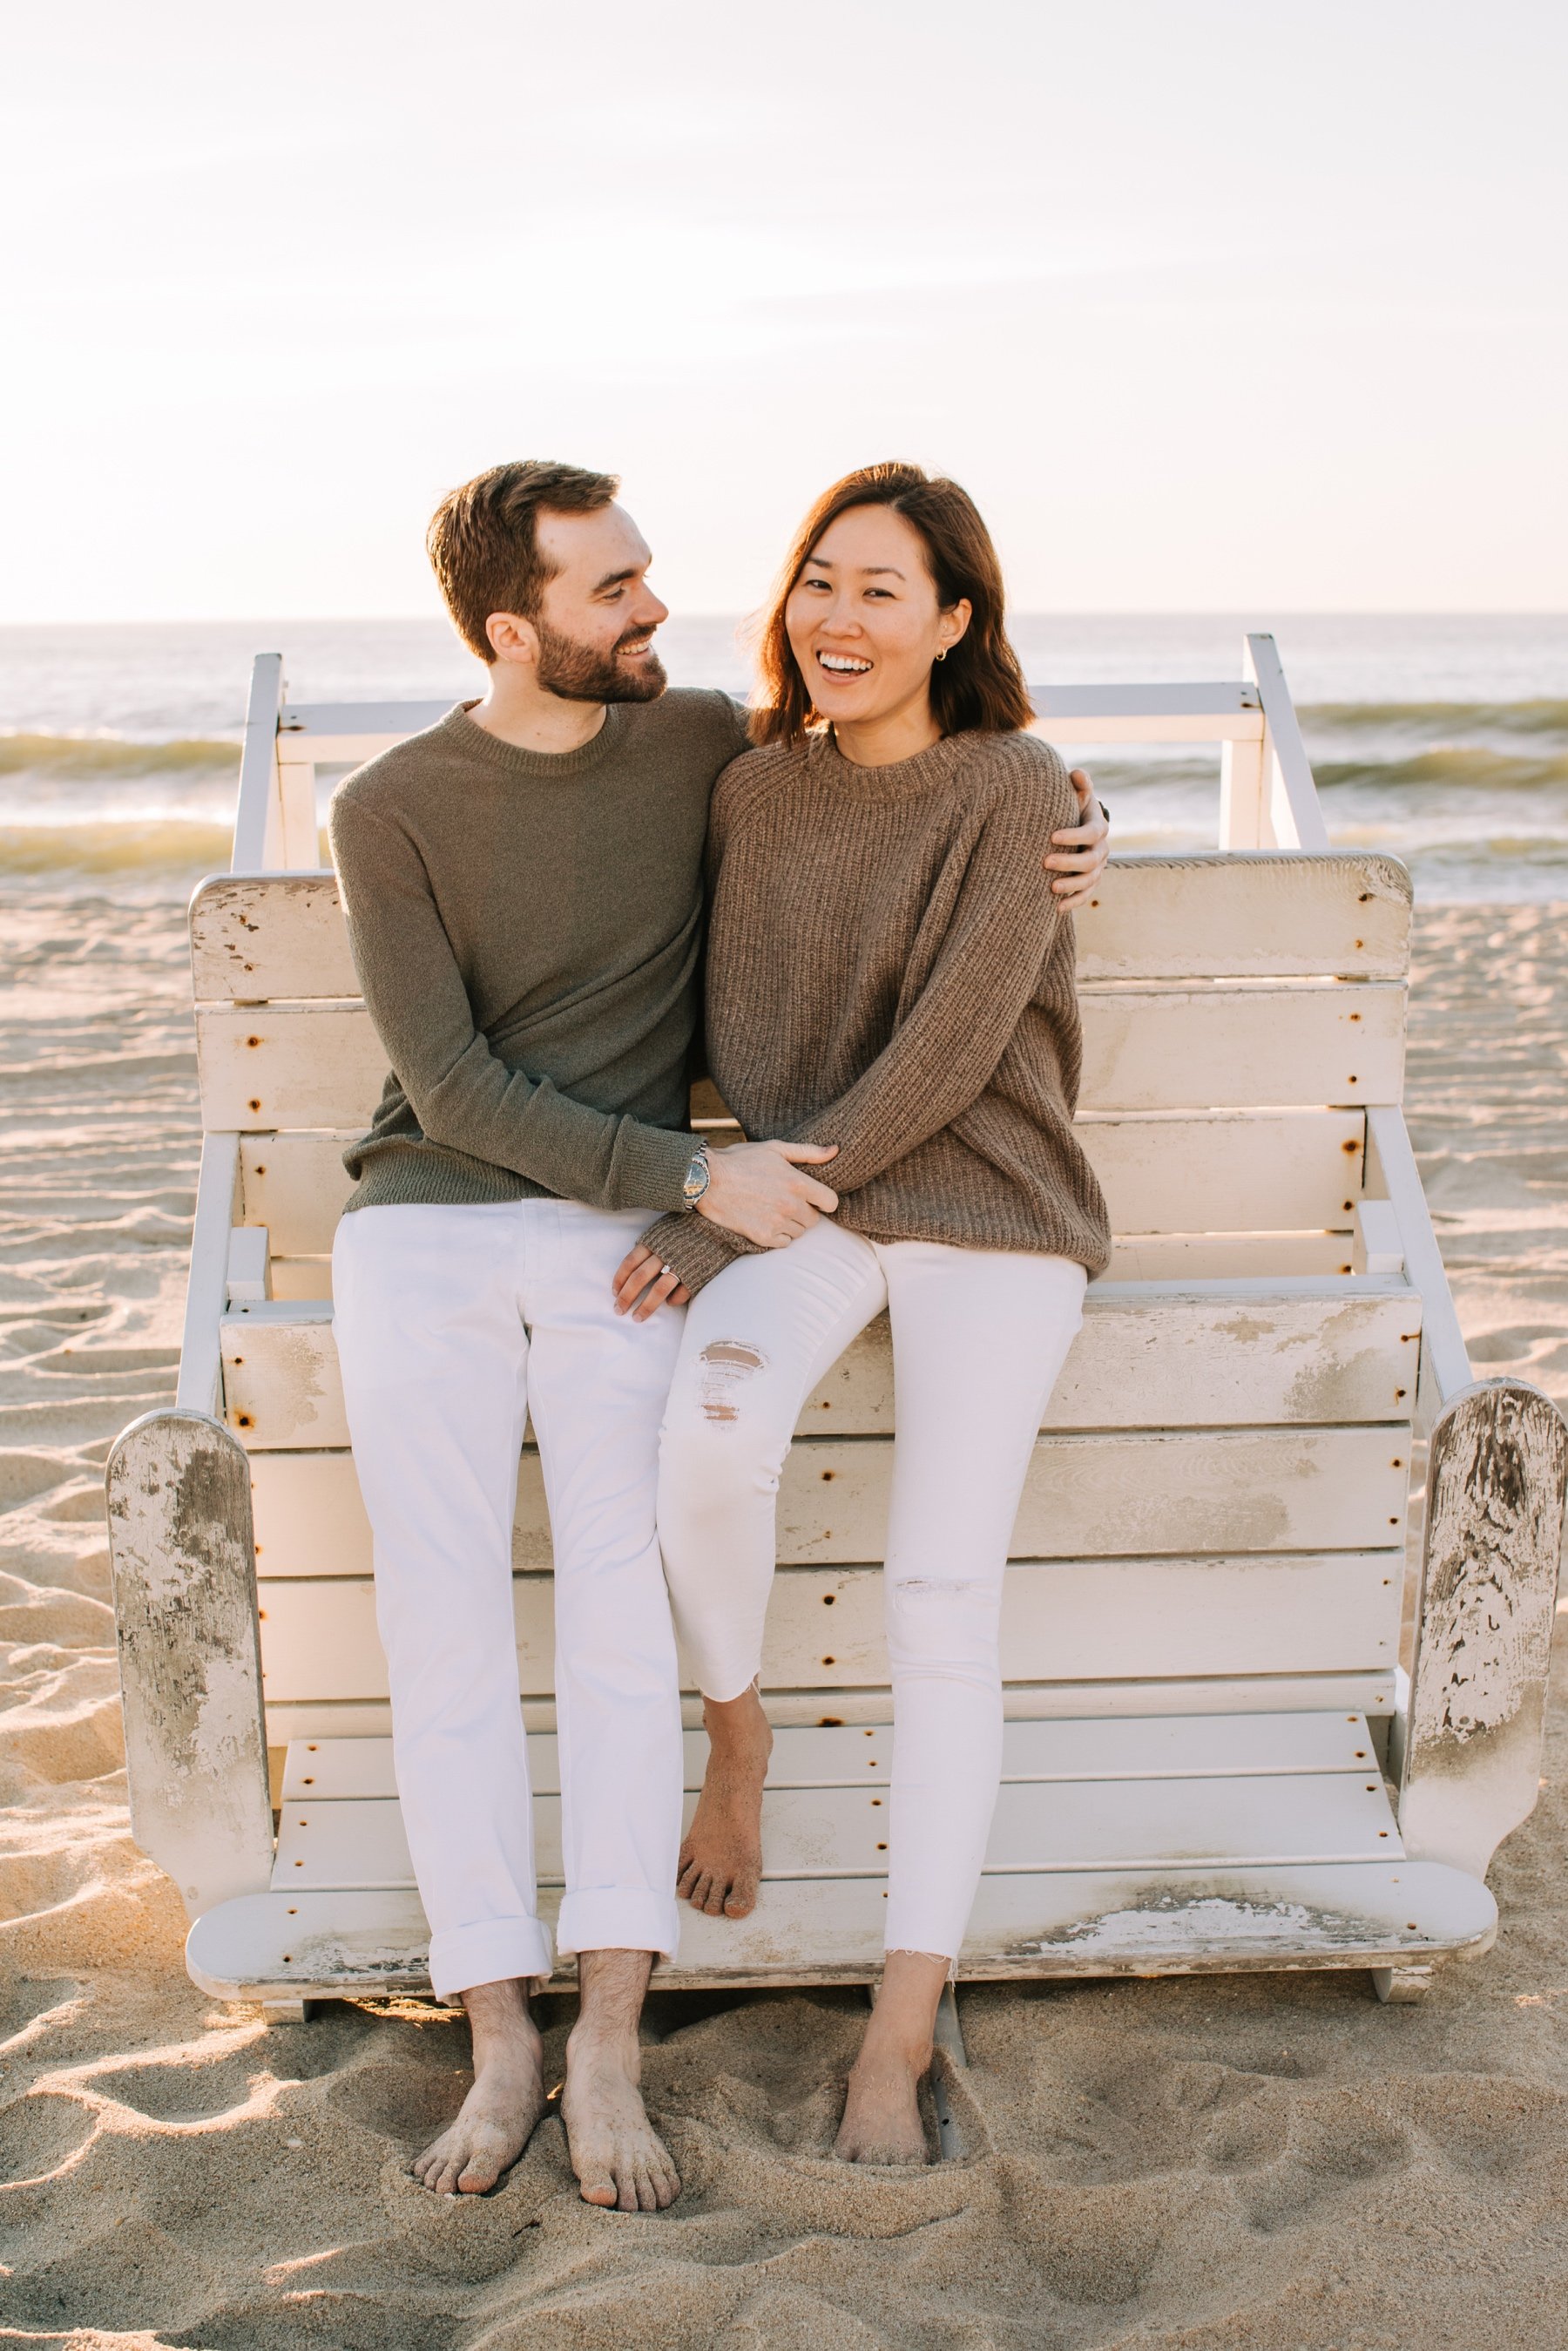 06_early morning beach engagement session.jpg